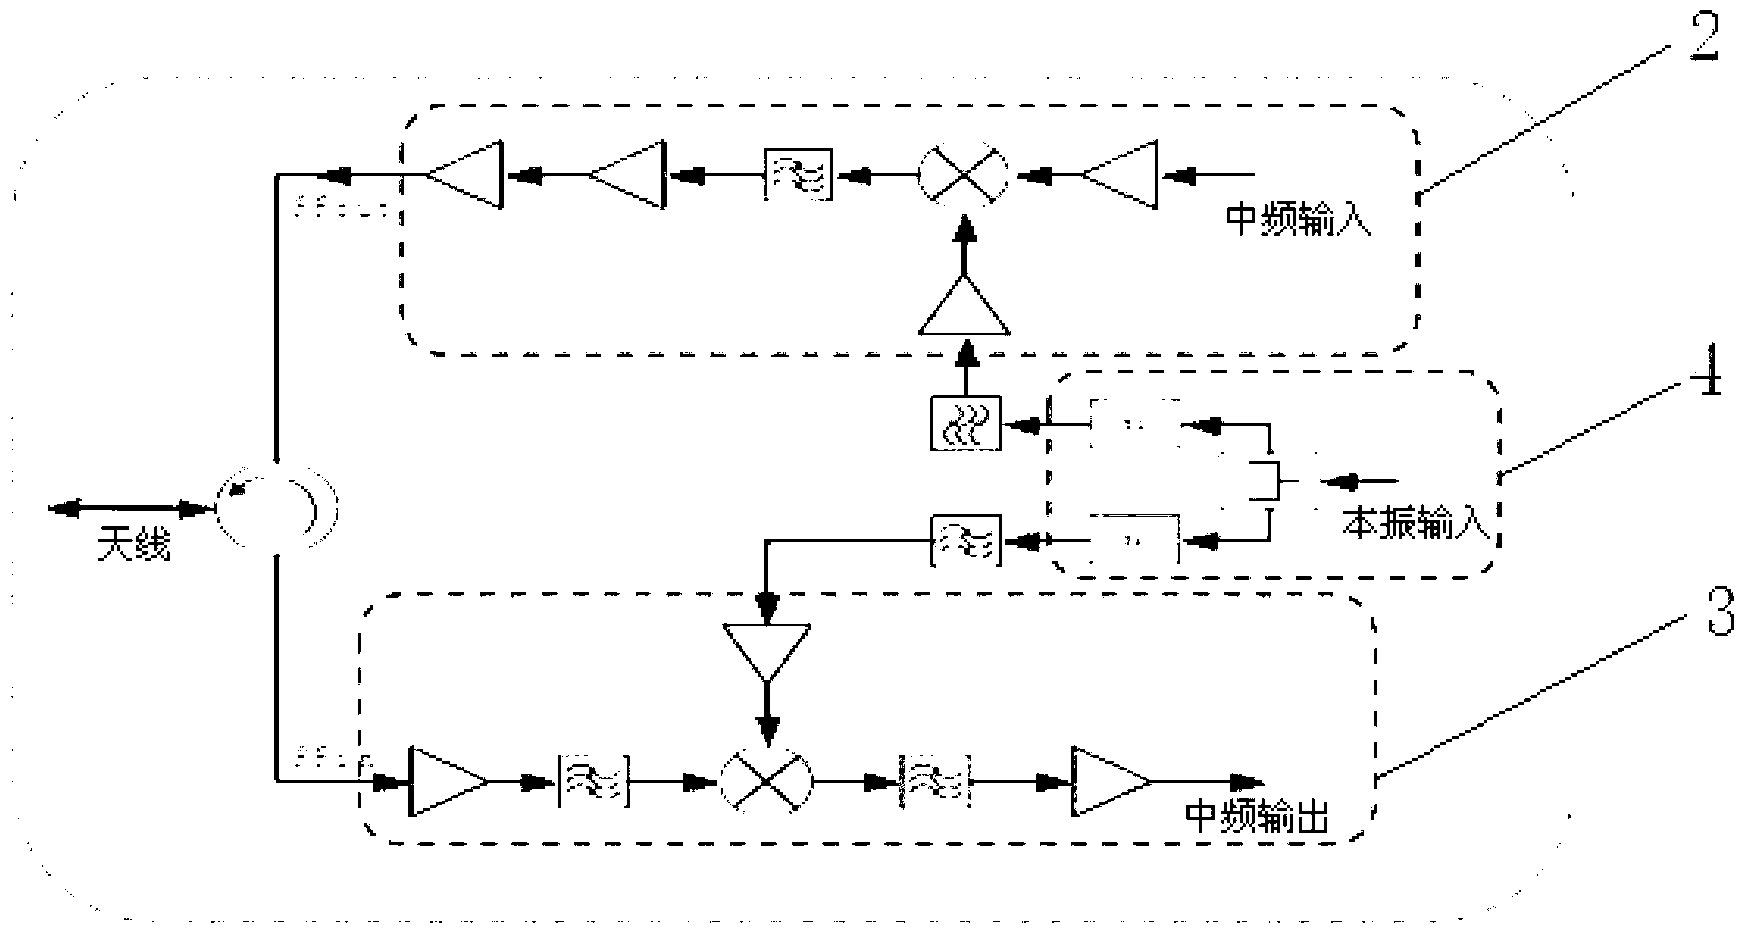 W-band receiving and transmitting assembly